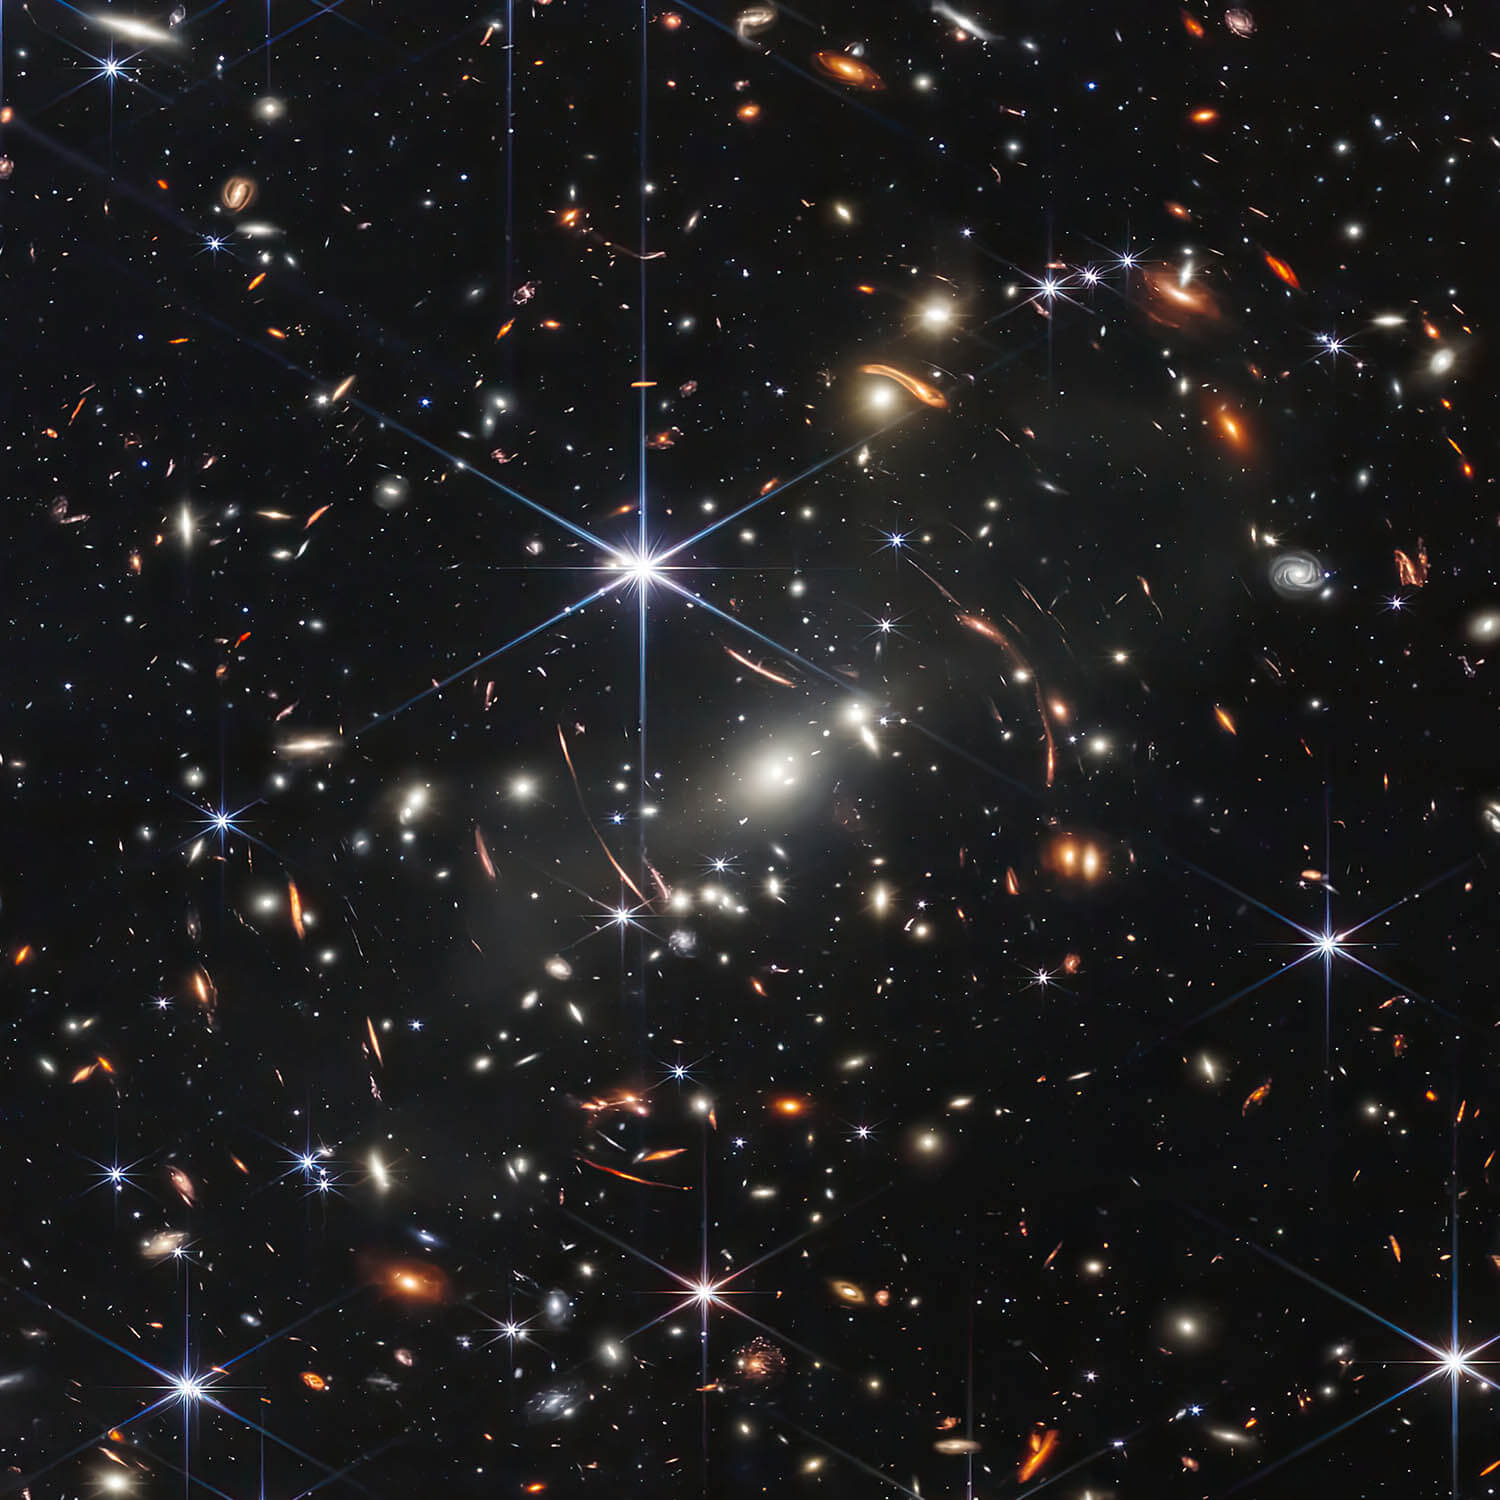 Galaxy Cluster SMACS 0723 Downloadable Poster